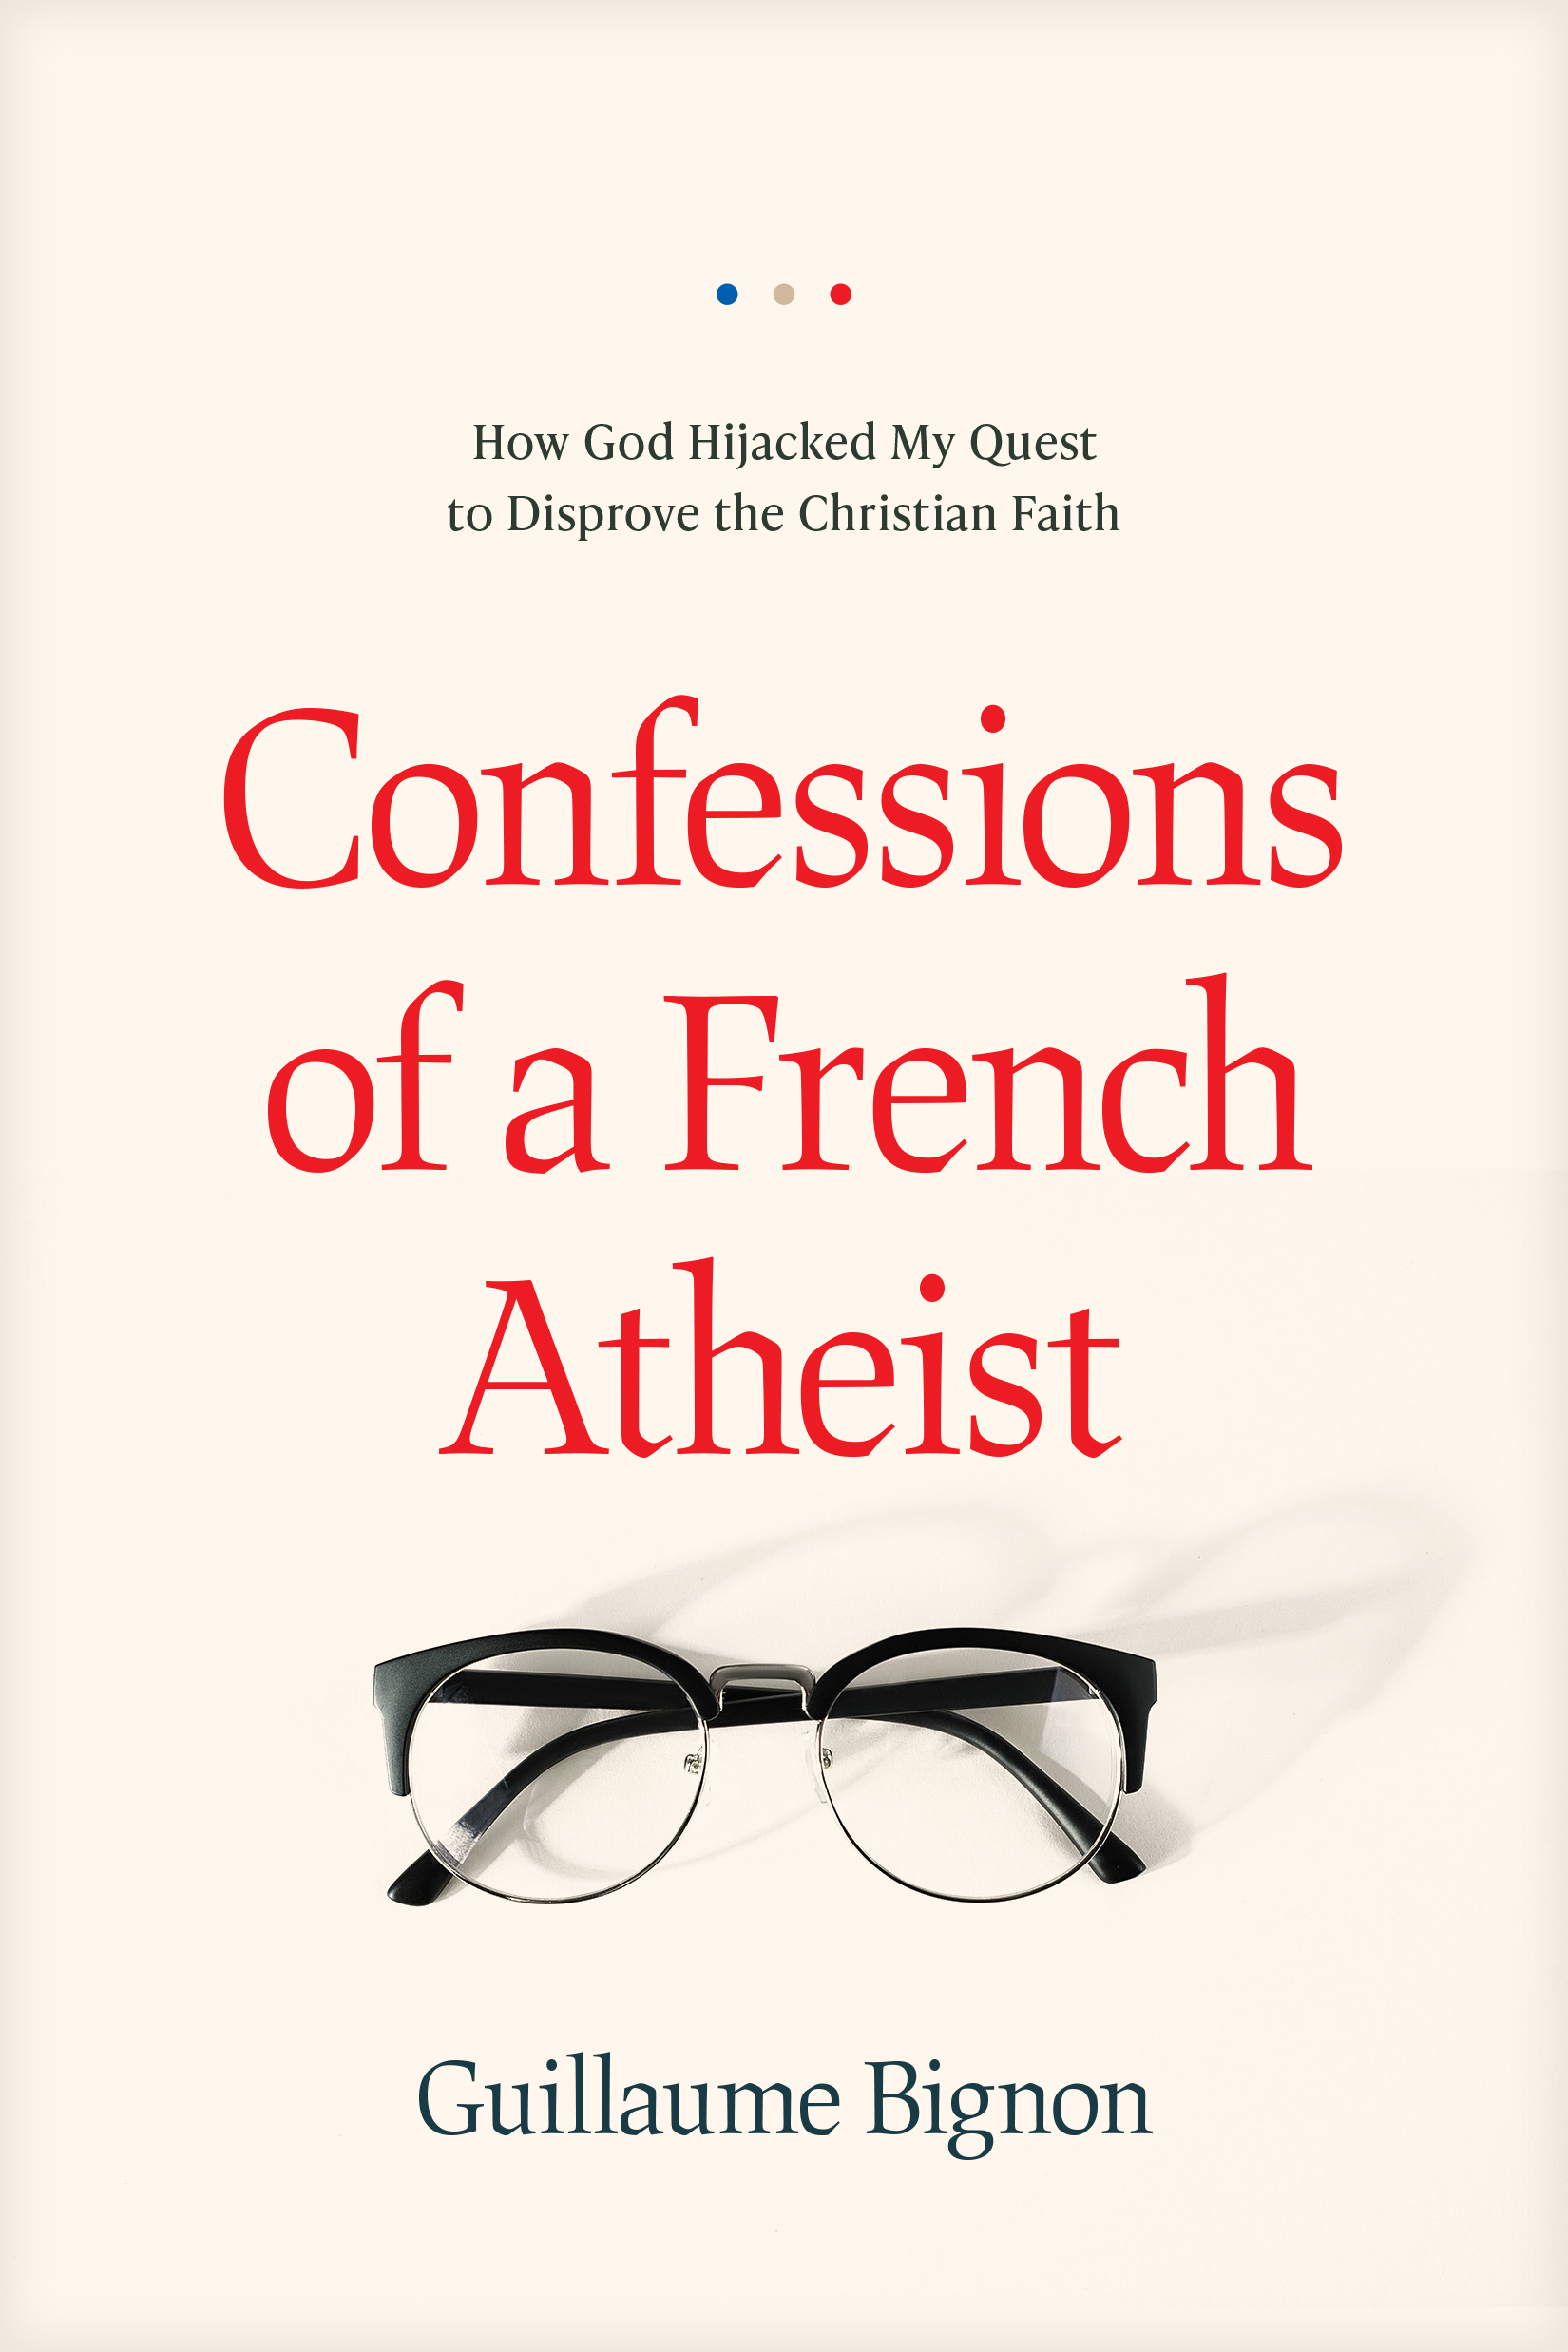 Confessions of a French Atheist Guillaume Bignon